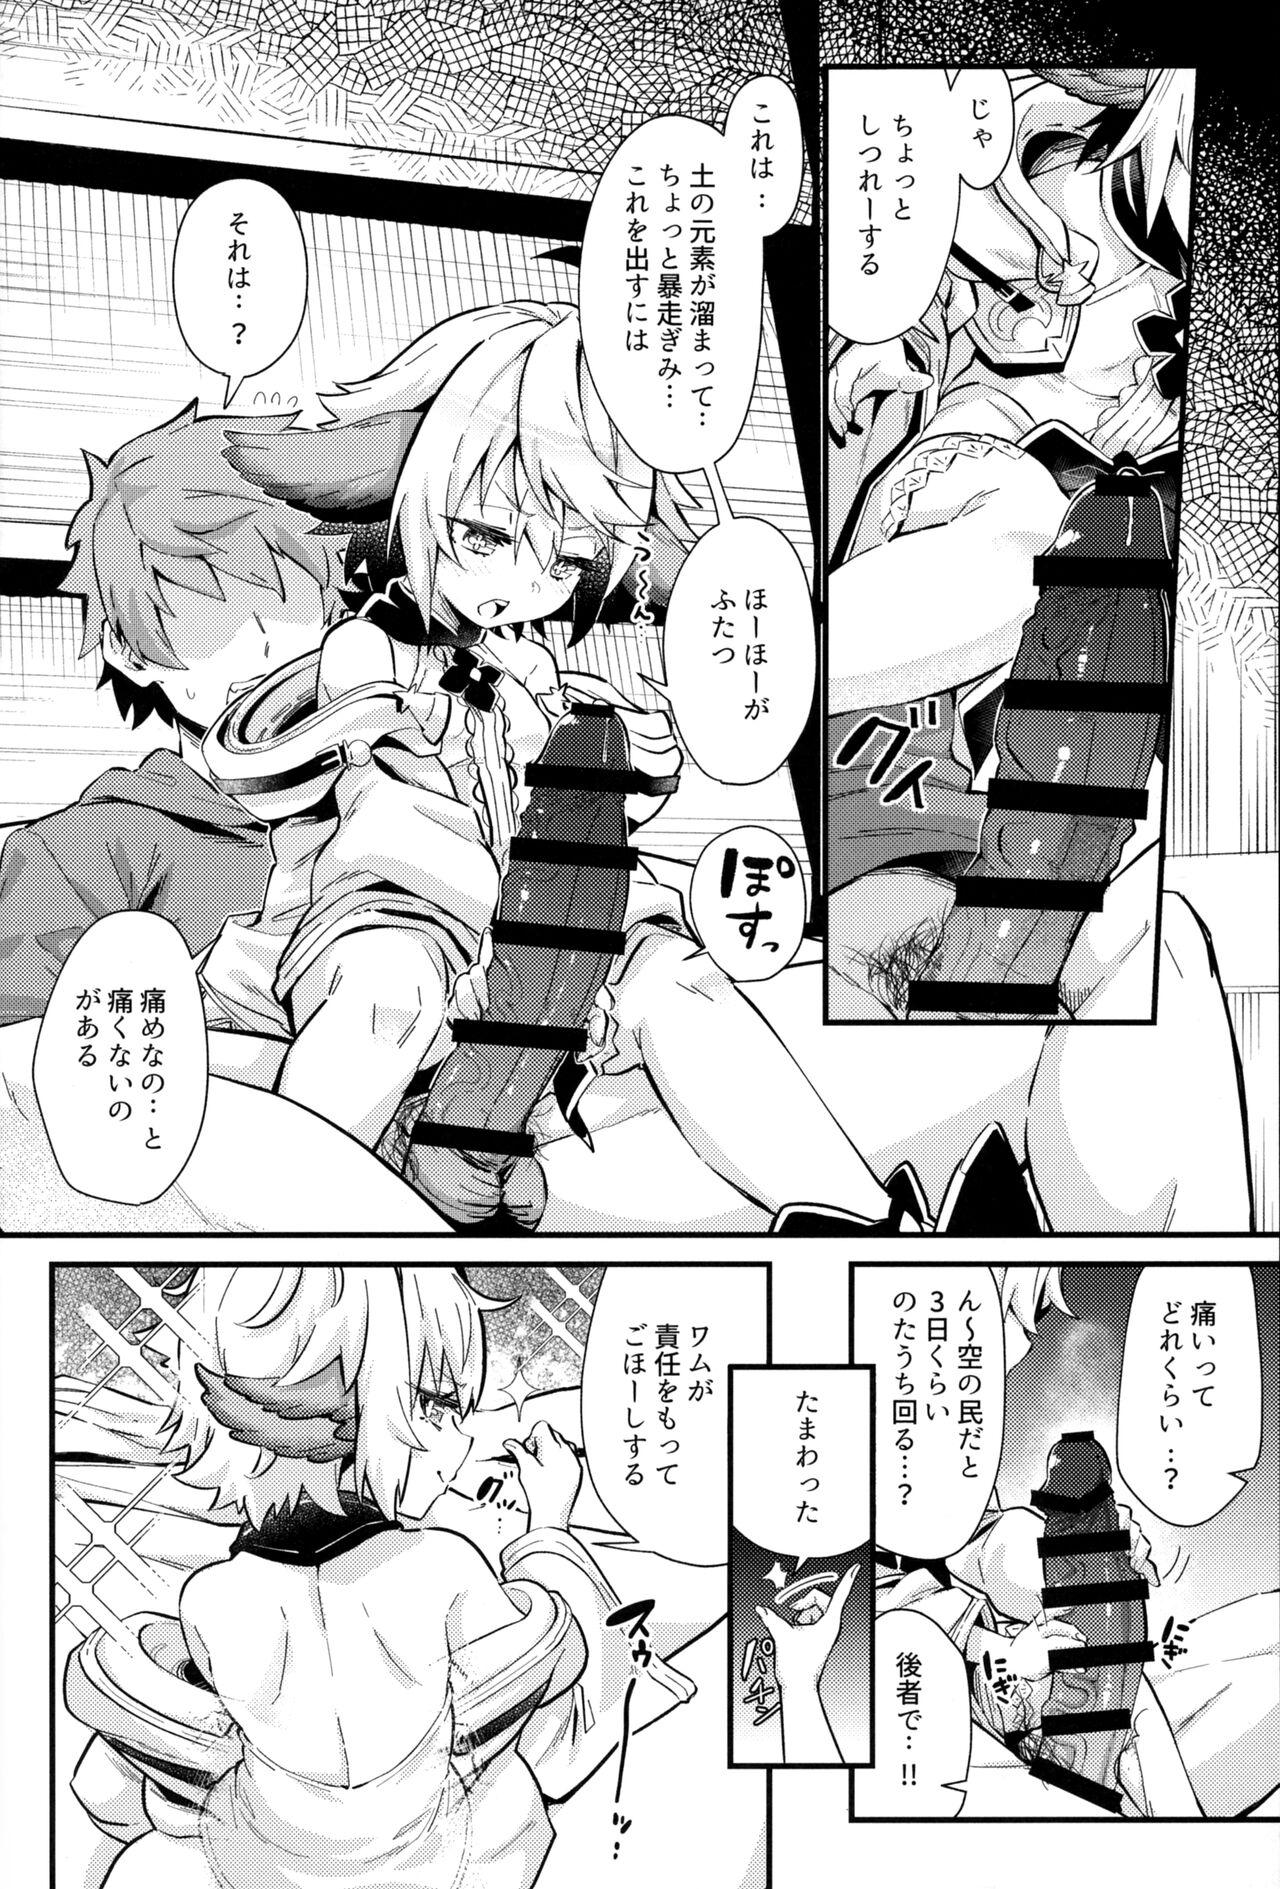 Missionary Position Porn 六竜灯儀・碧 - Granblue fantasy Gay - Page 3